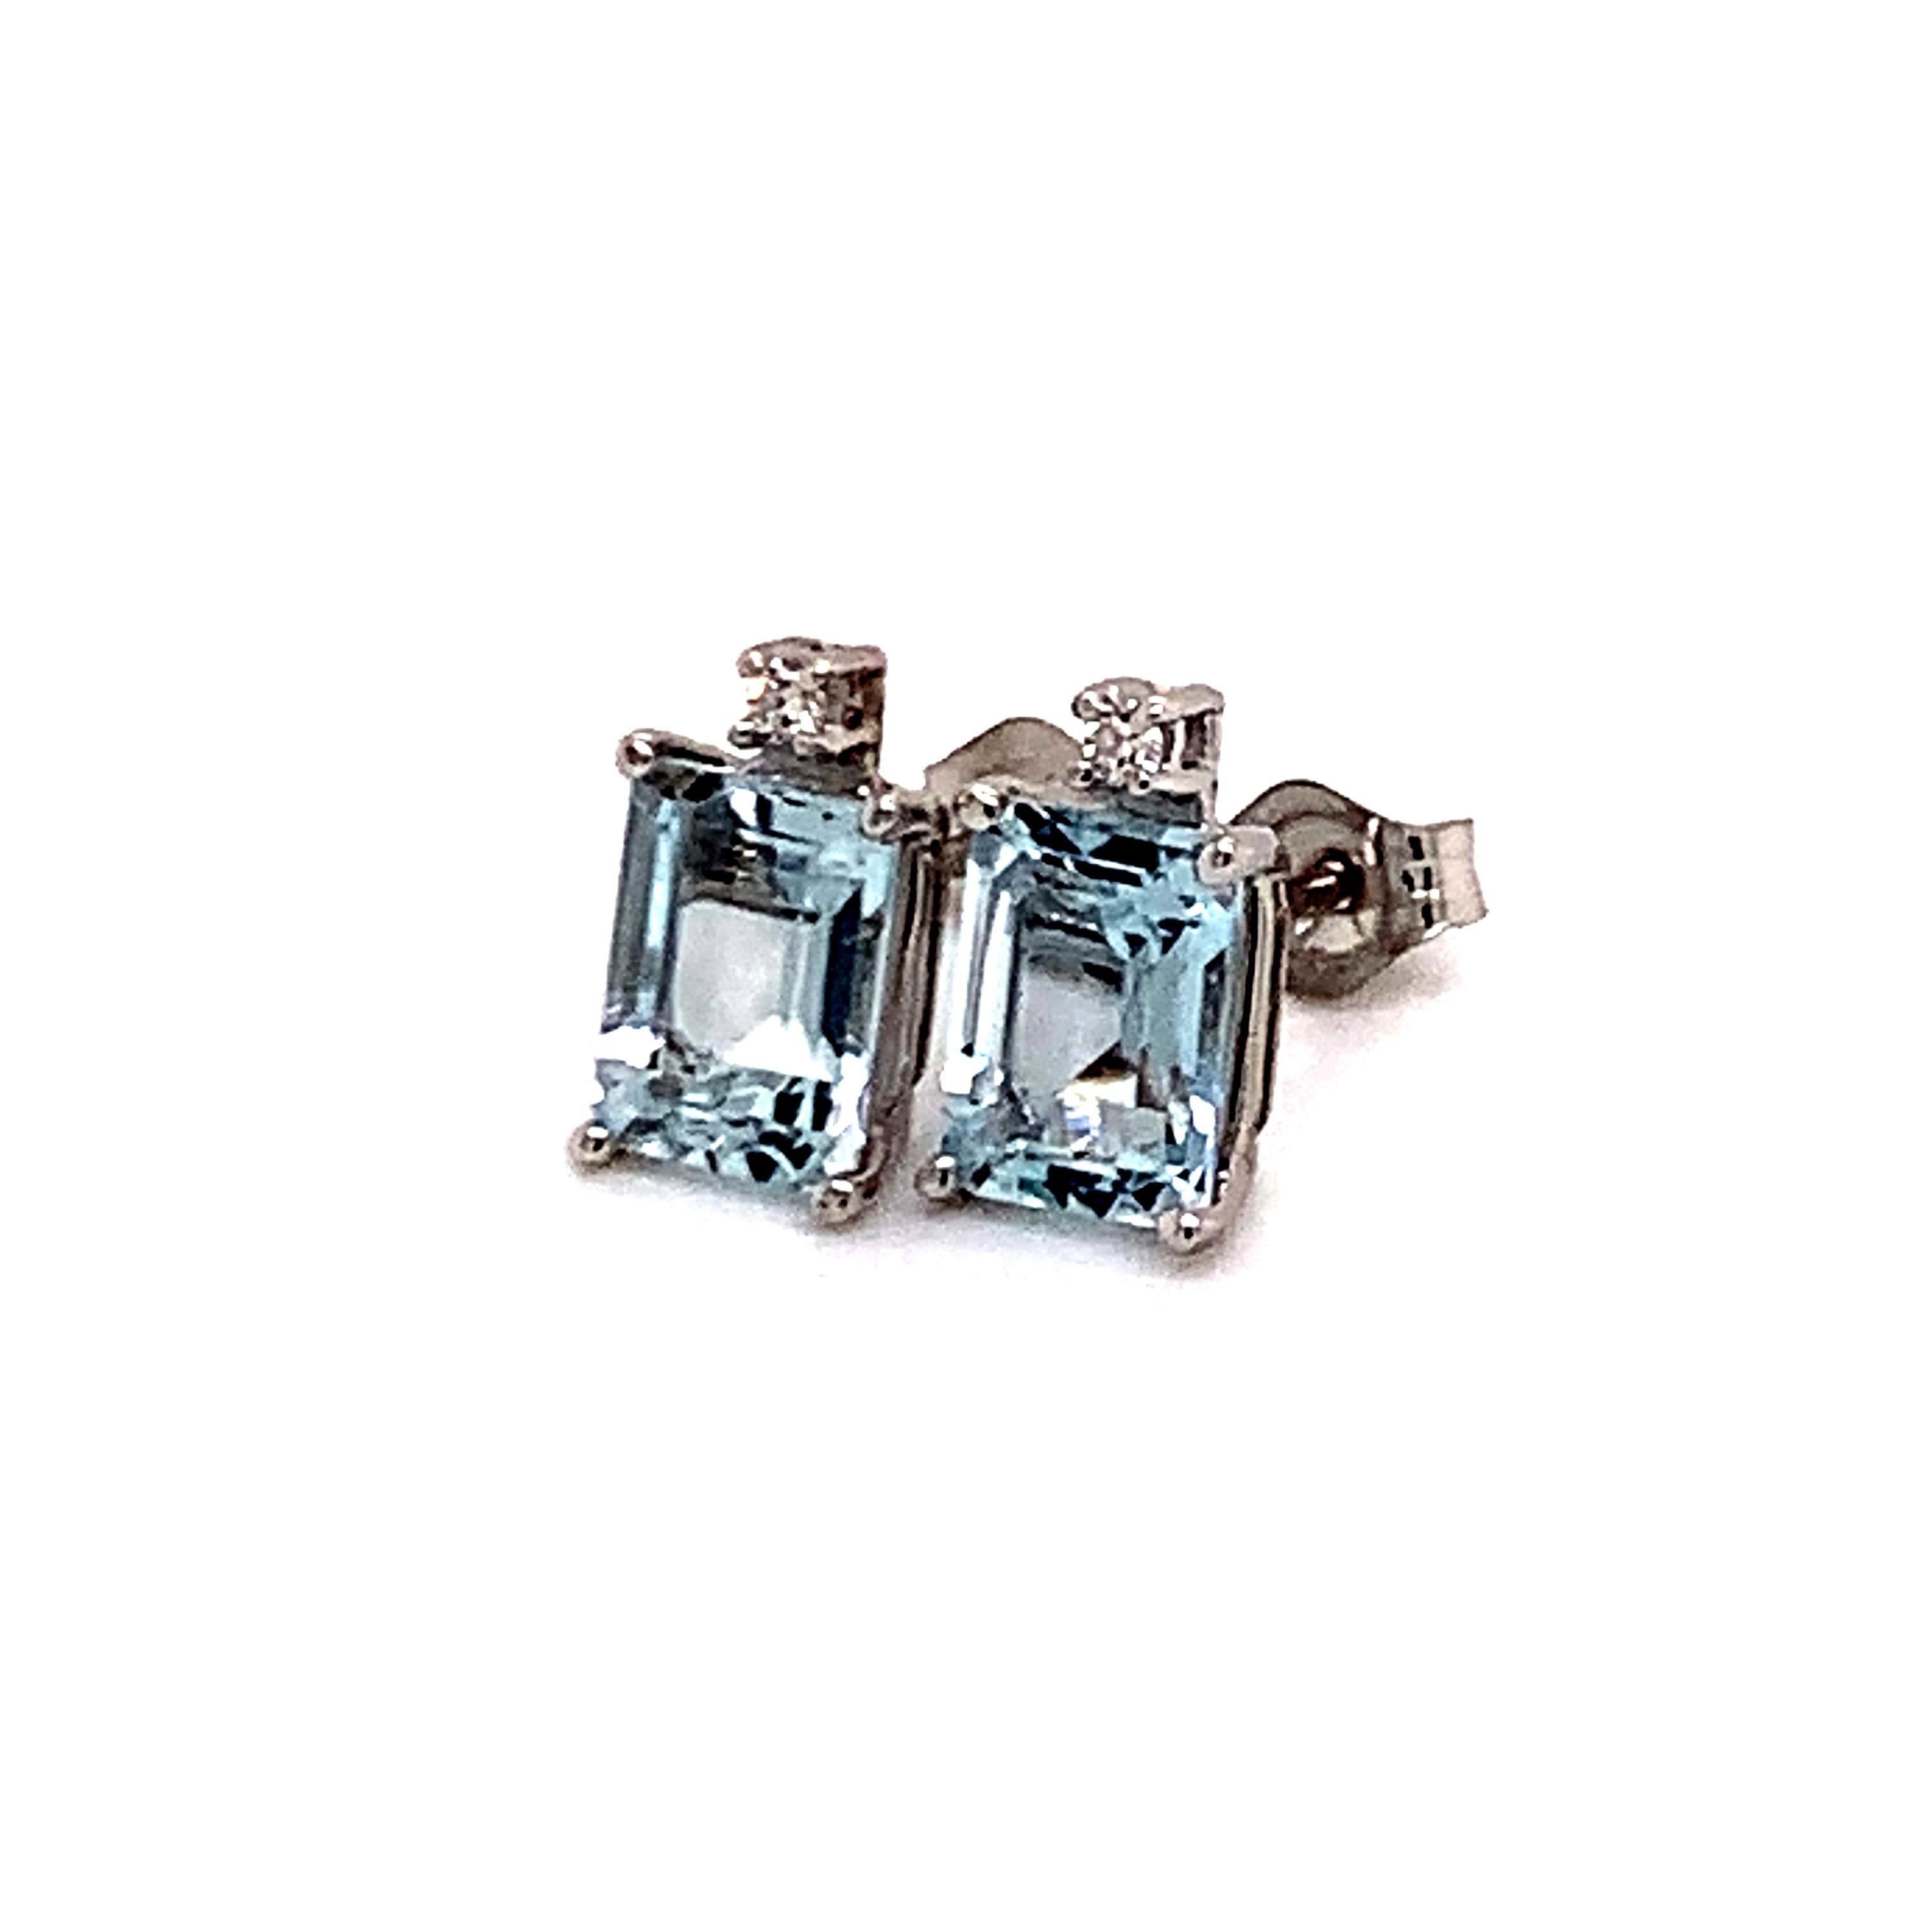 Natural Aquamarine Diamond Earrings 14k White Gold 1.84 TCW Certified In New Condition For Sale In Brooklyn, NY